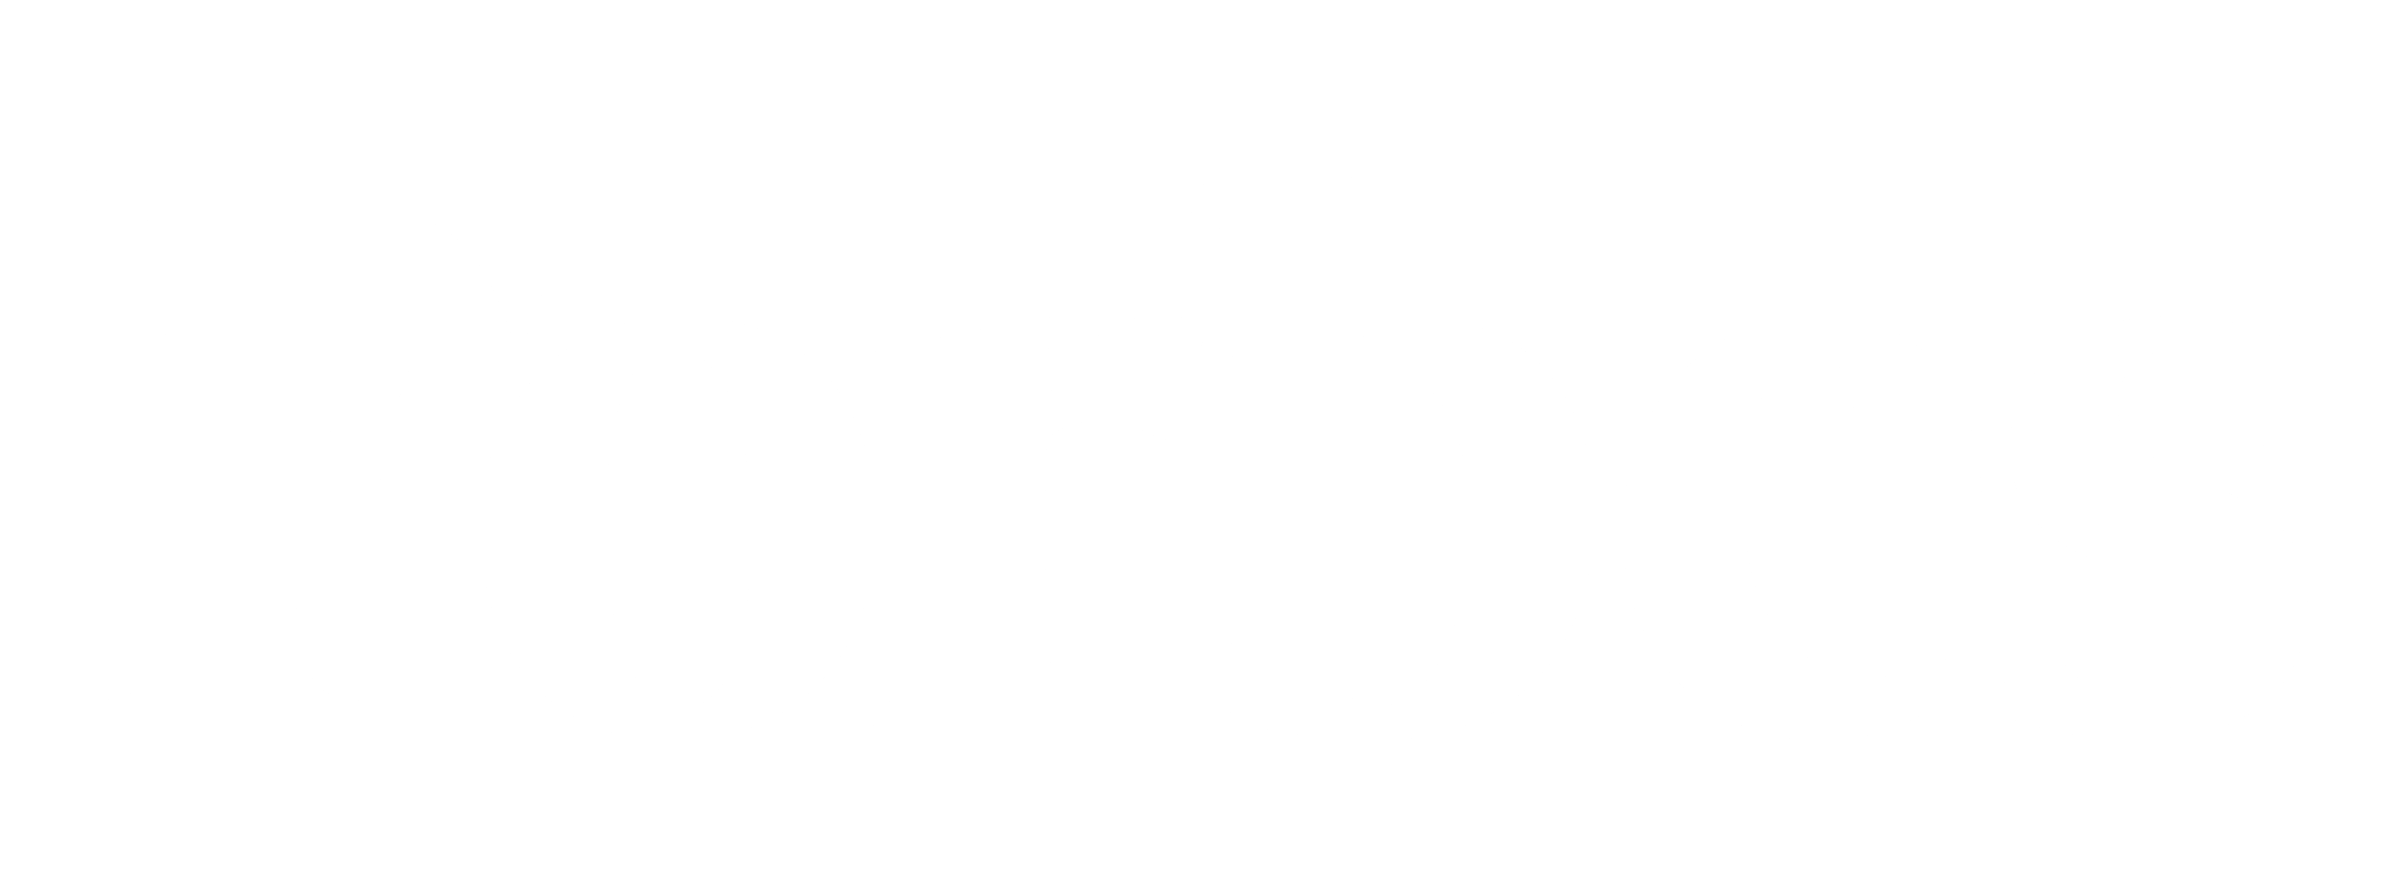 forbes white.png